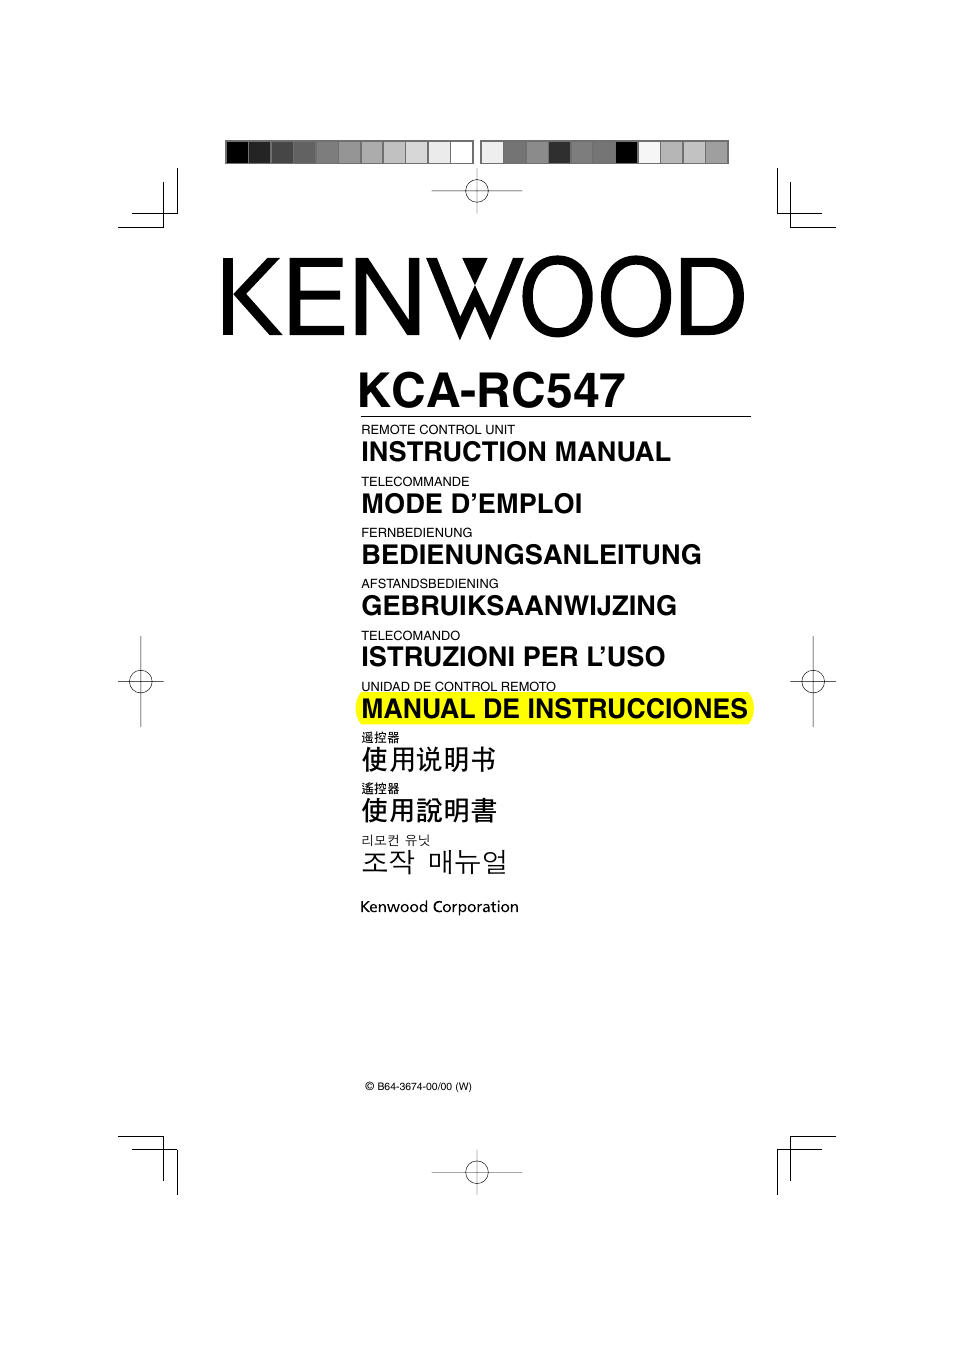 Kenwood KCA-RC547 User Manual | 3 pages